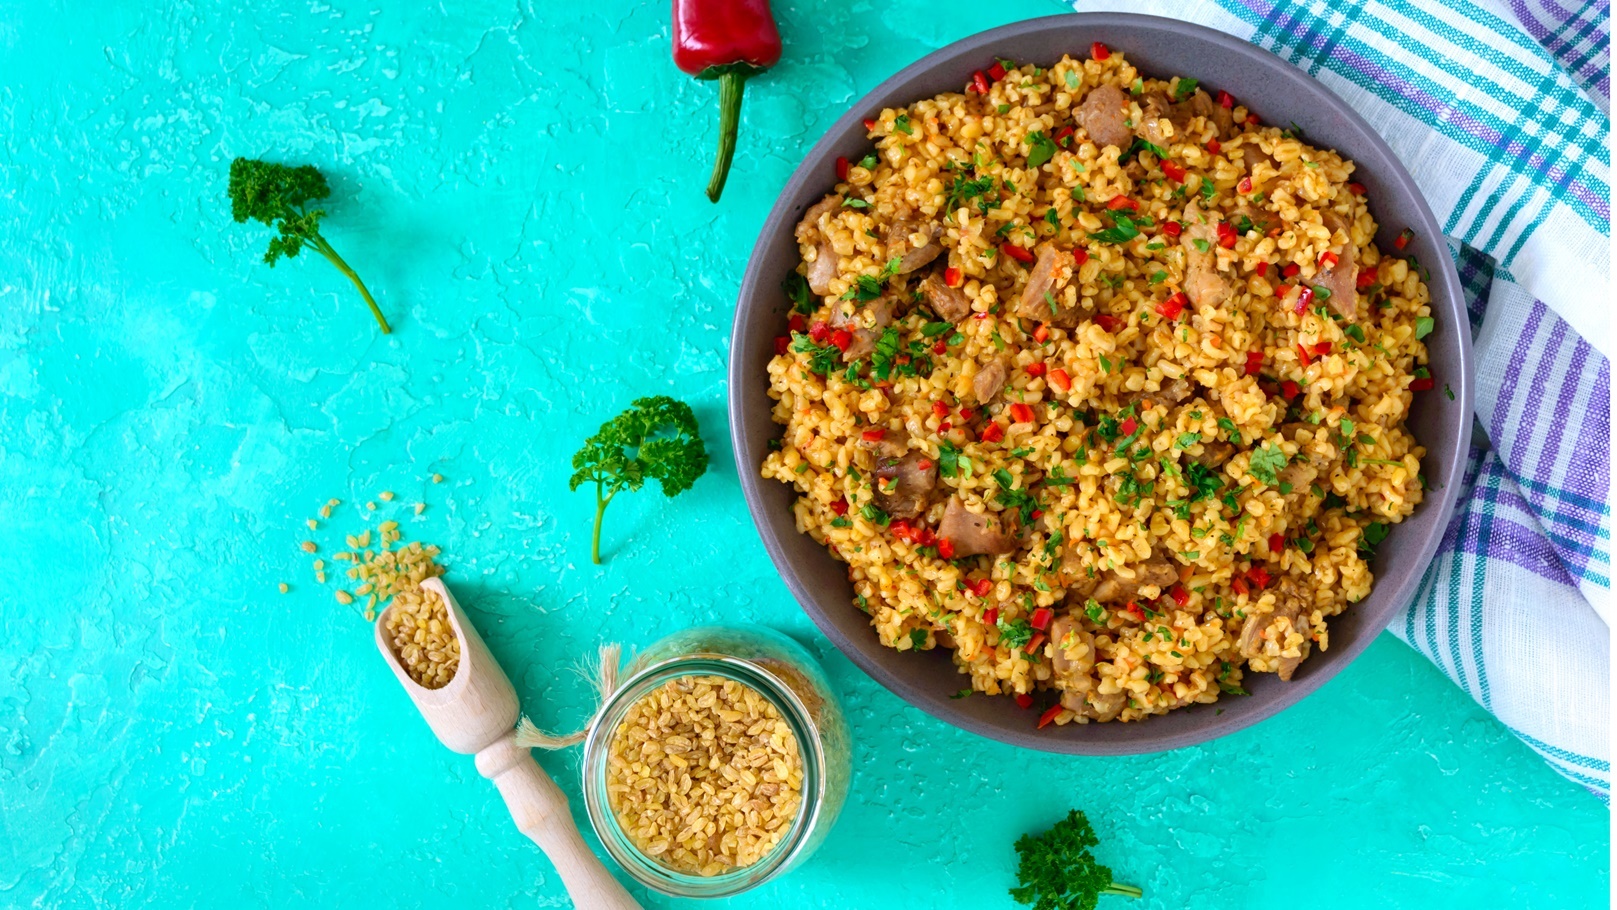 bulgur-with-chicken-and-vegetables-2021-09-02-06-19-58-utc